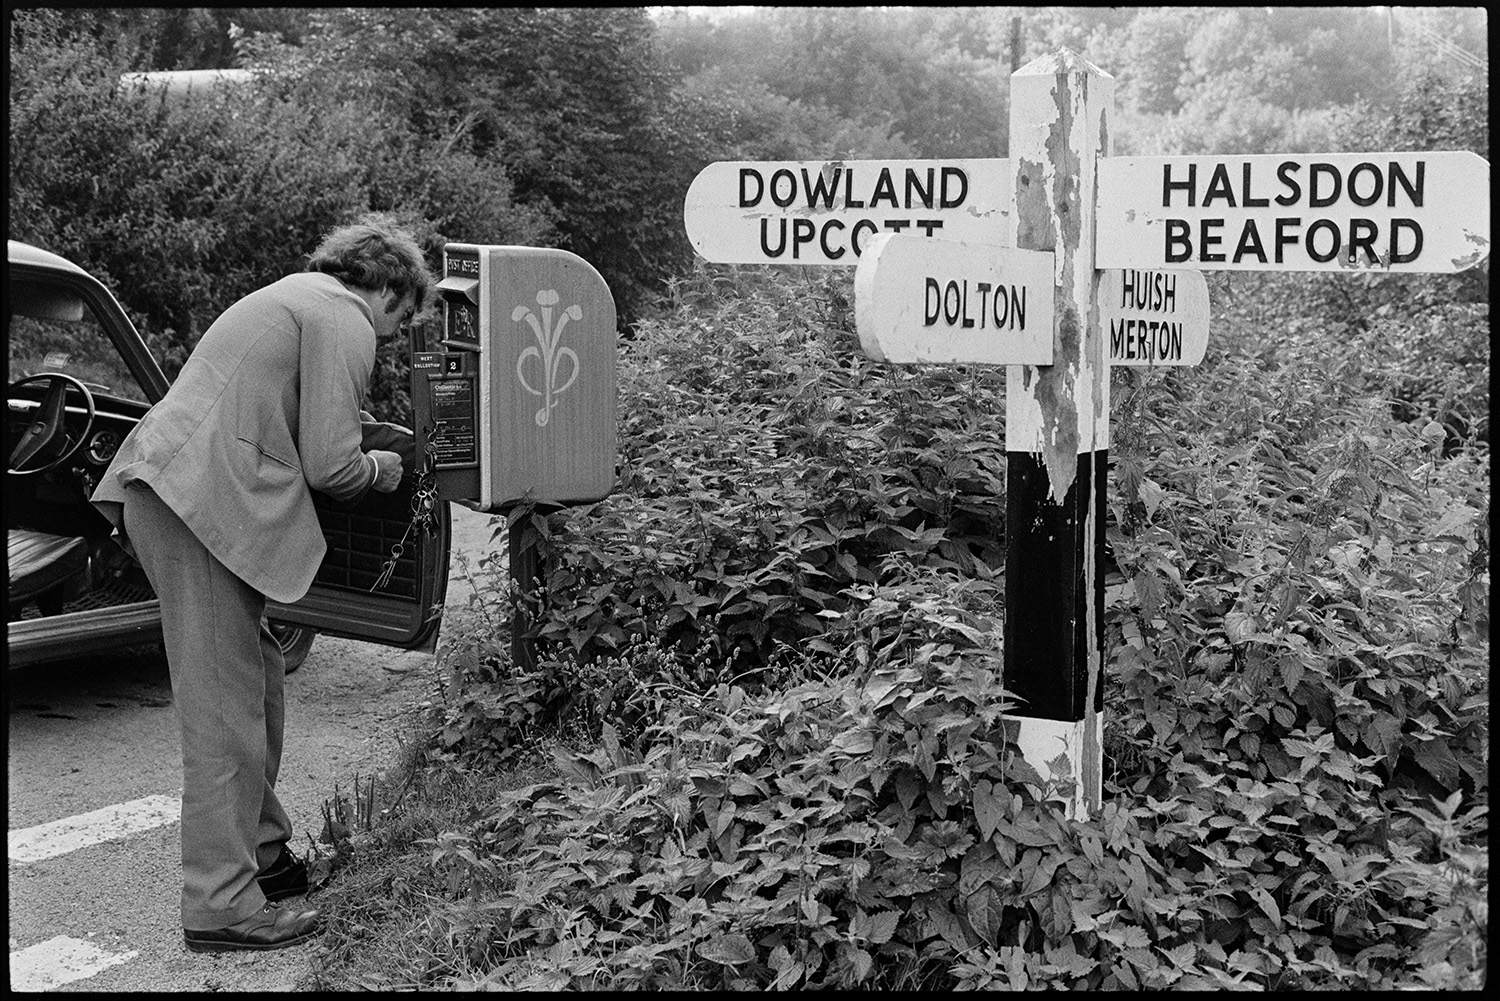 Portman emptying letter box next to road sign, nettles. 
[A postman emptying a post box at Woolridge Cross, Dolton, next to a signpost overgrown by stinging nettles.]